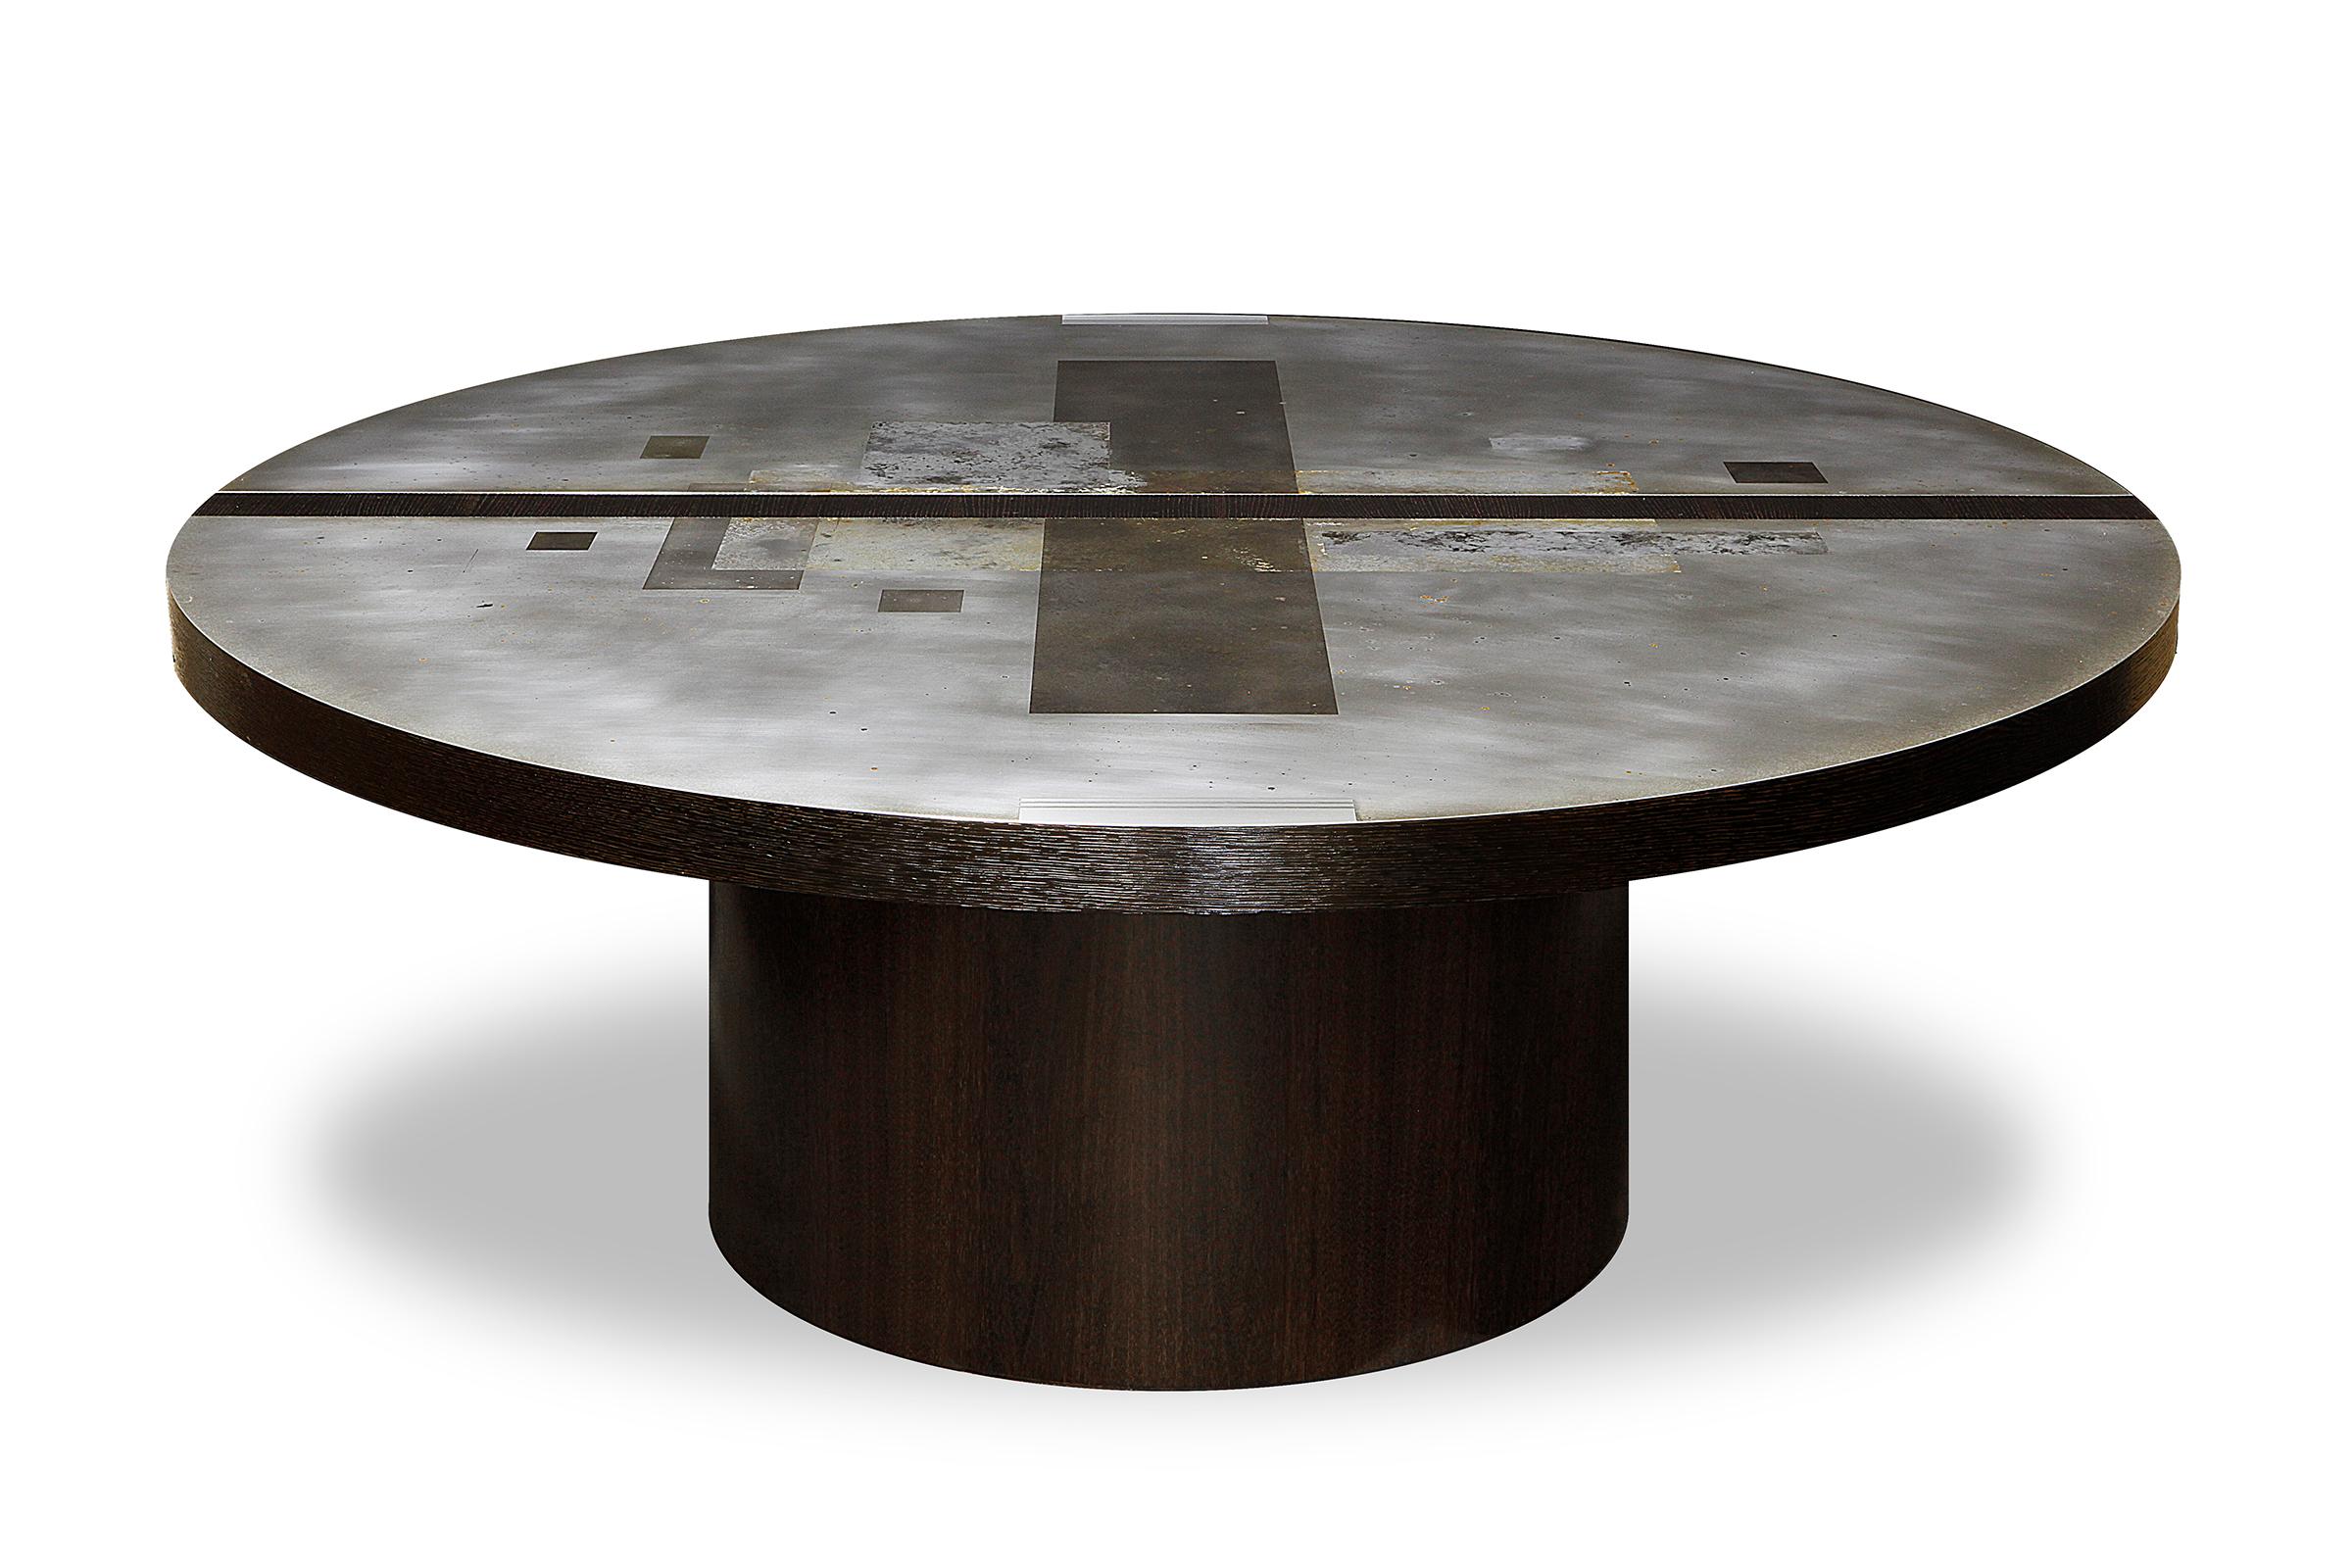 Extravagant spaces deserve an extravagant table!

As a result of his training at art school, Florian approaches each new design as a work of art. His latest addition to the Divided Lands Table series is truly unique, and perfect for any room that